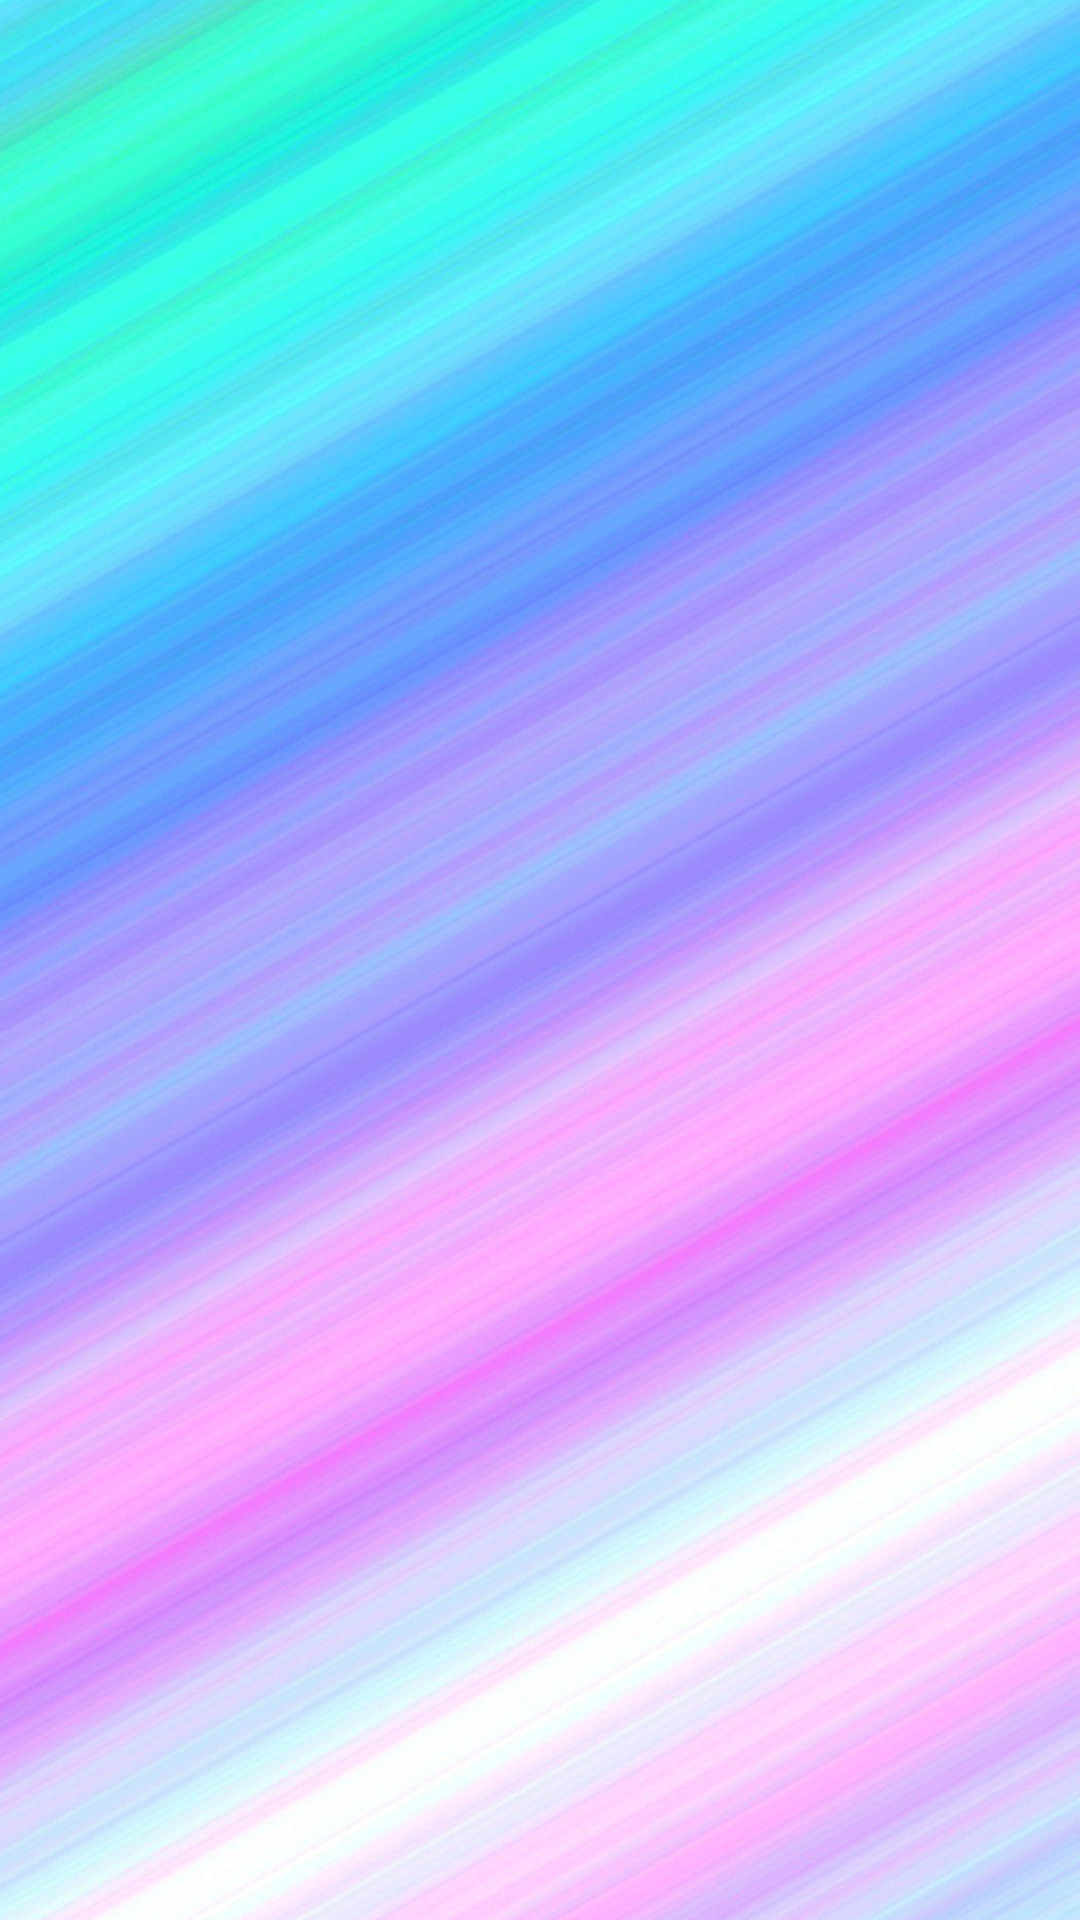 1080x1920 Abstract Colorful Pink Blue Galaxy S5 Wallpaper for Samsung -  http://helpyourselfimages.